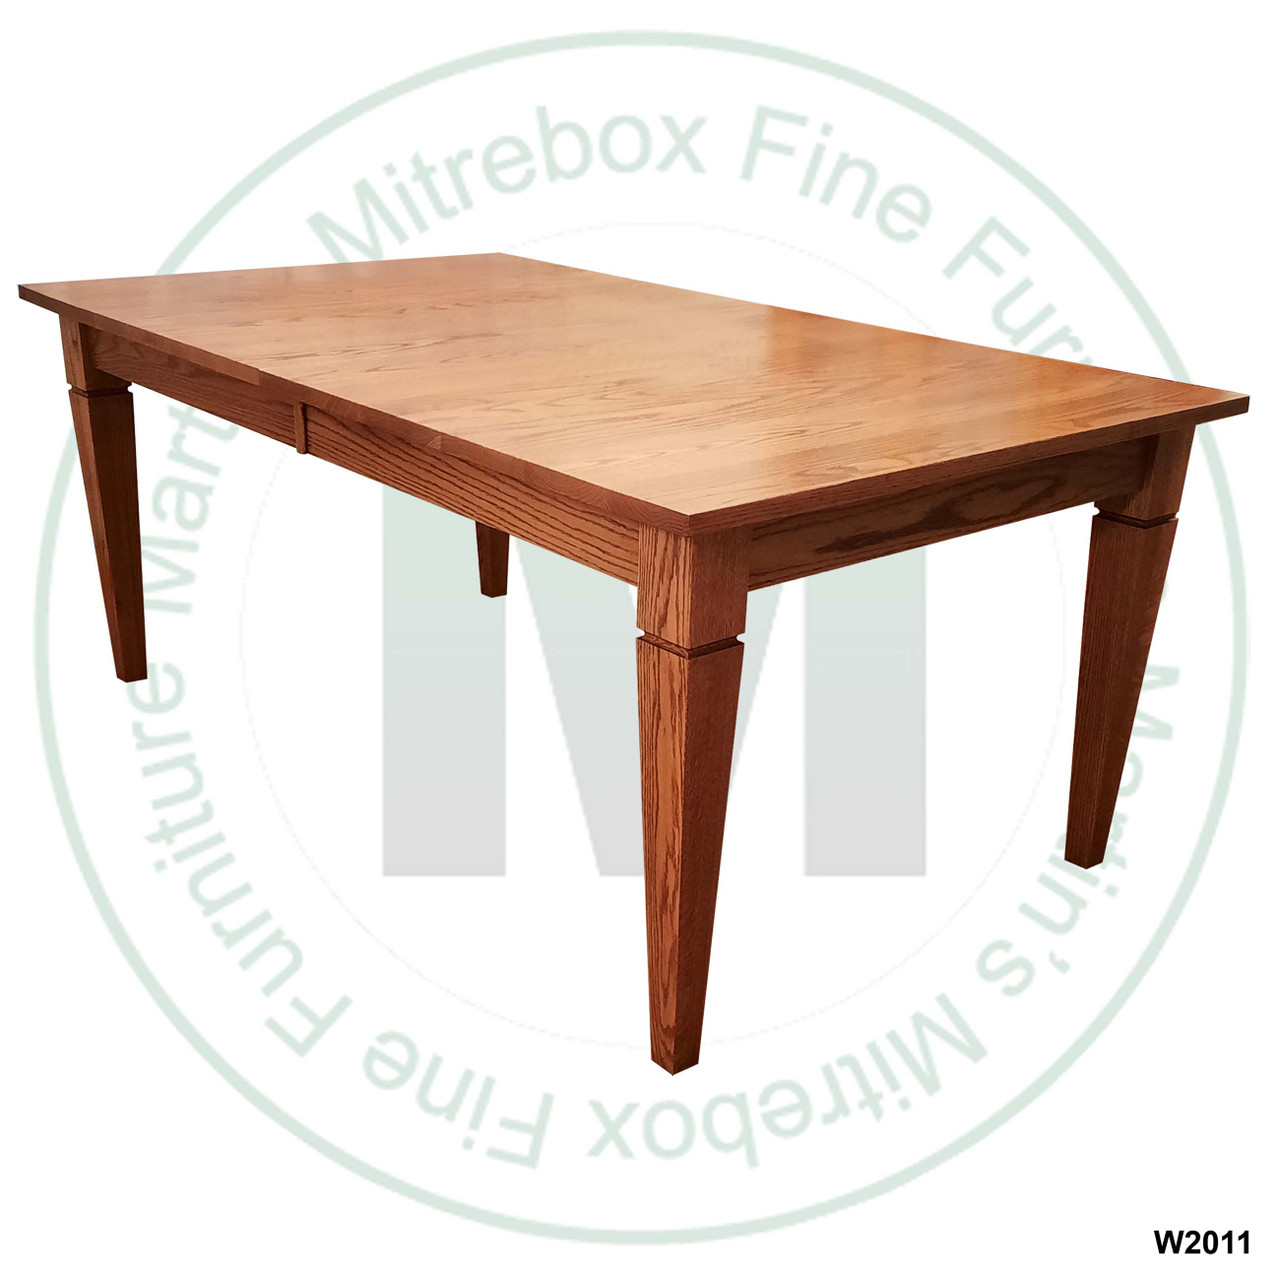 Oak Reesor Solid Top Harvest Table 36''D x 108''W x 30''H Table Has 1.25'' Thick Top